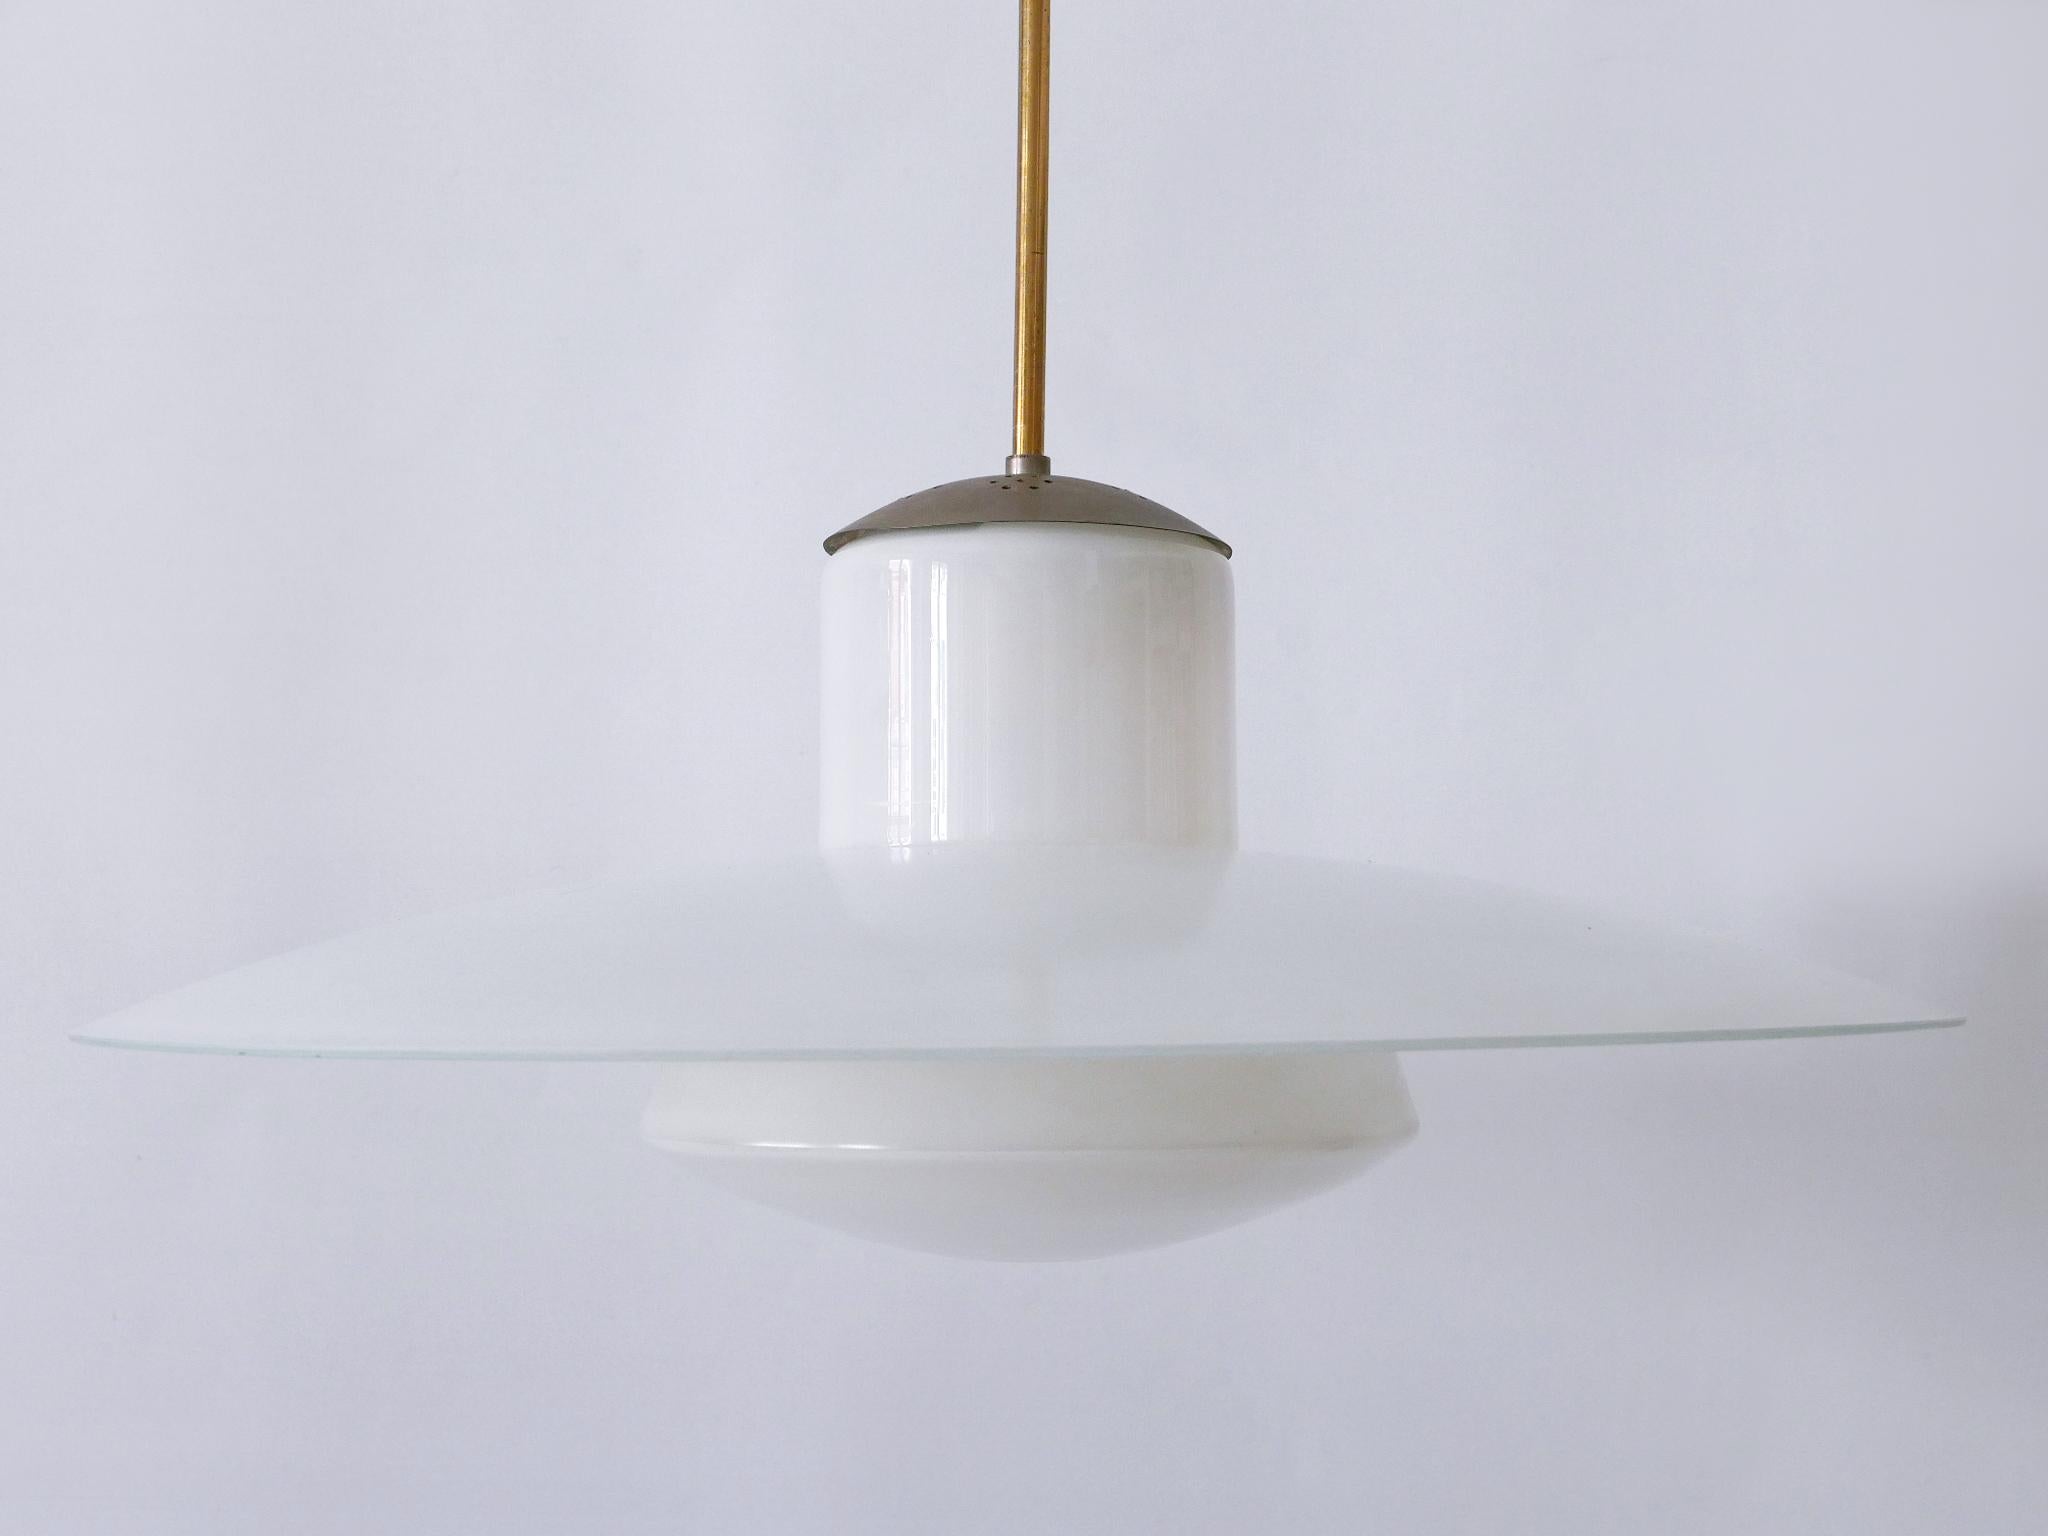 Rare Mid-Century Modern Pendant Lamp by Wolfgang Tümpel for Doria Germany 1950s For Sale 5